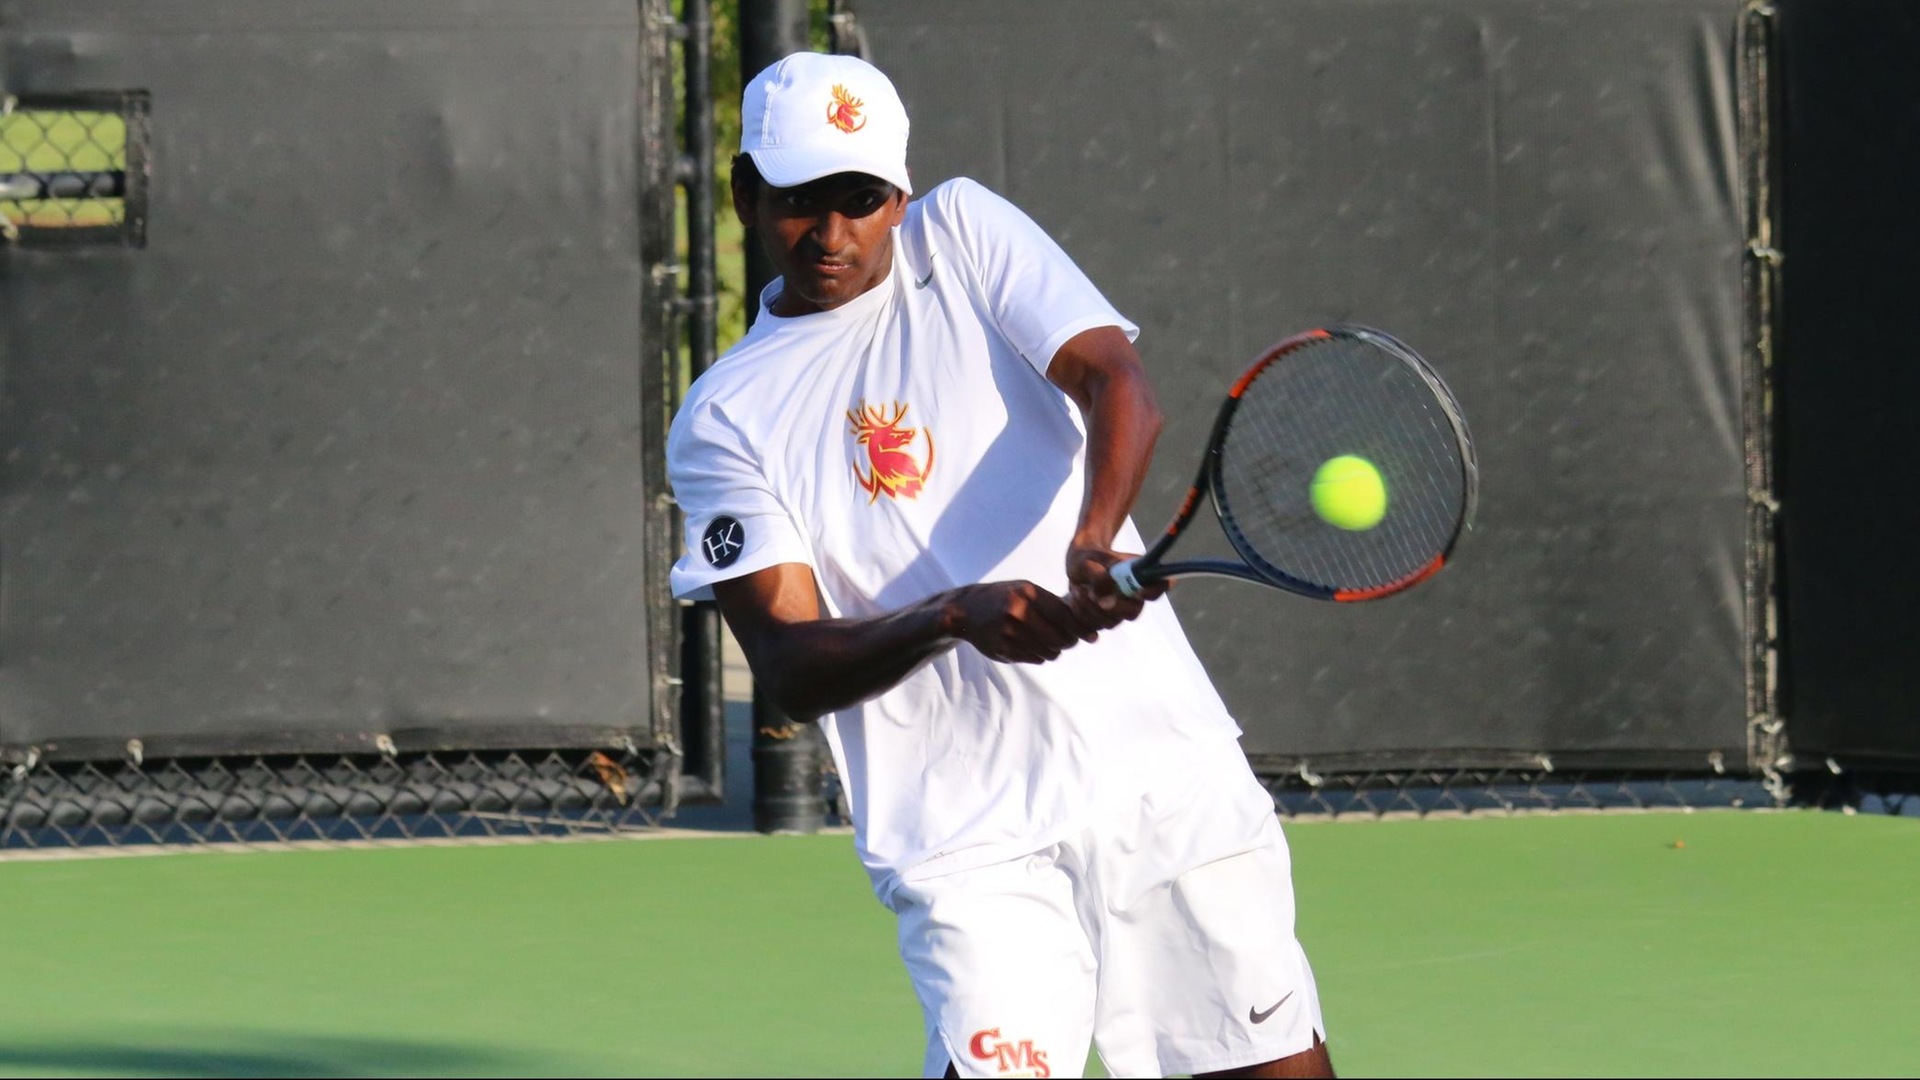 Advik Mareedu won 30 singles matches, including the ITA Cup title in the fall